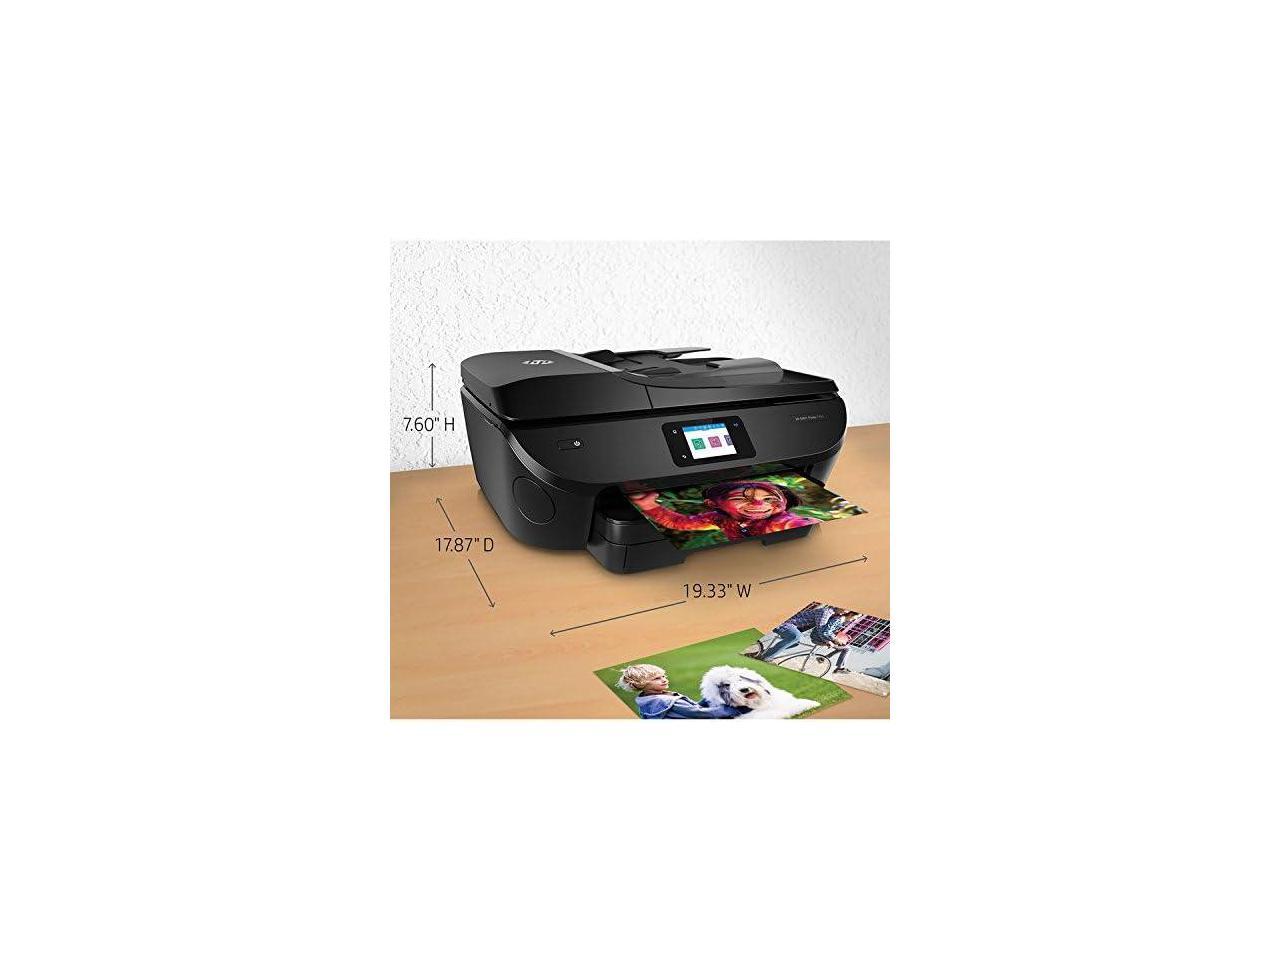 Refurbished Hp Envy Photo 7855 All In One Printer With Wireless Direct Printing 2888